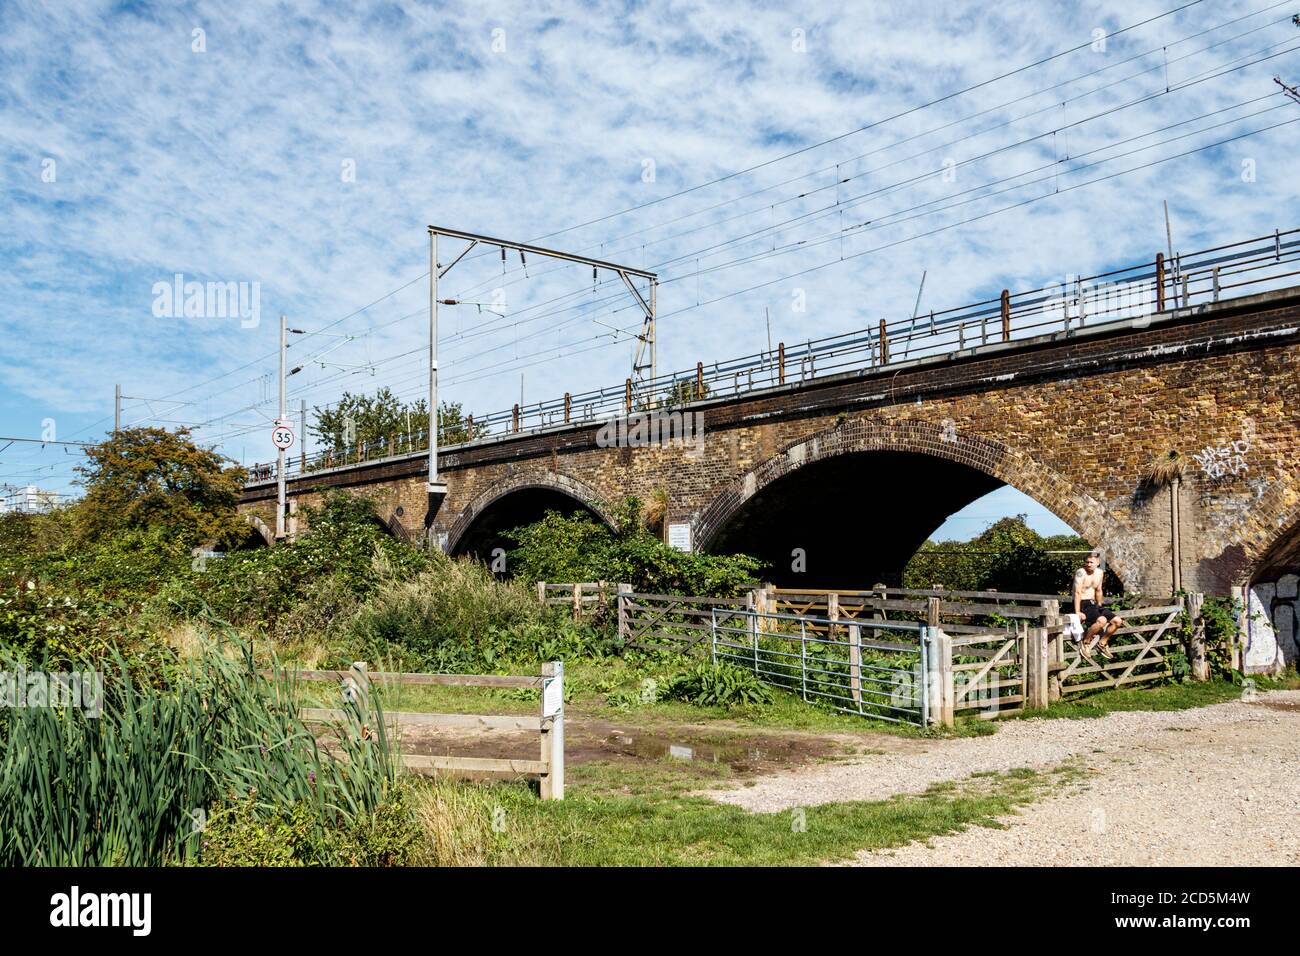 A brick viaduct carrying the railway line across the Walthamstow Marshes, Clapton, London, UK Stock Photo